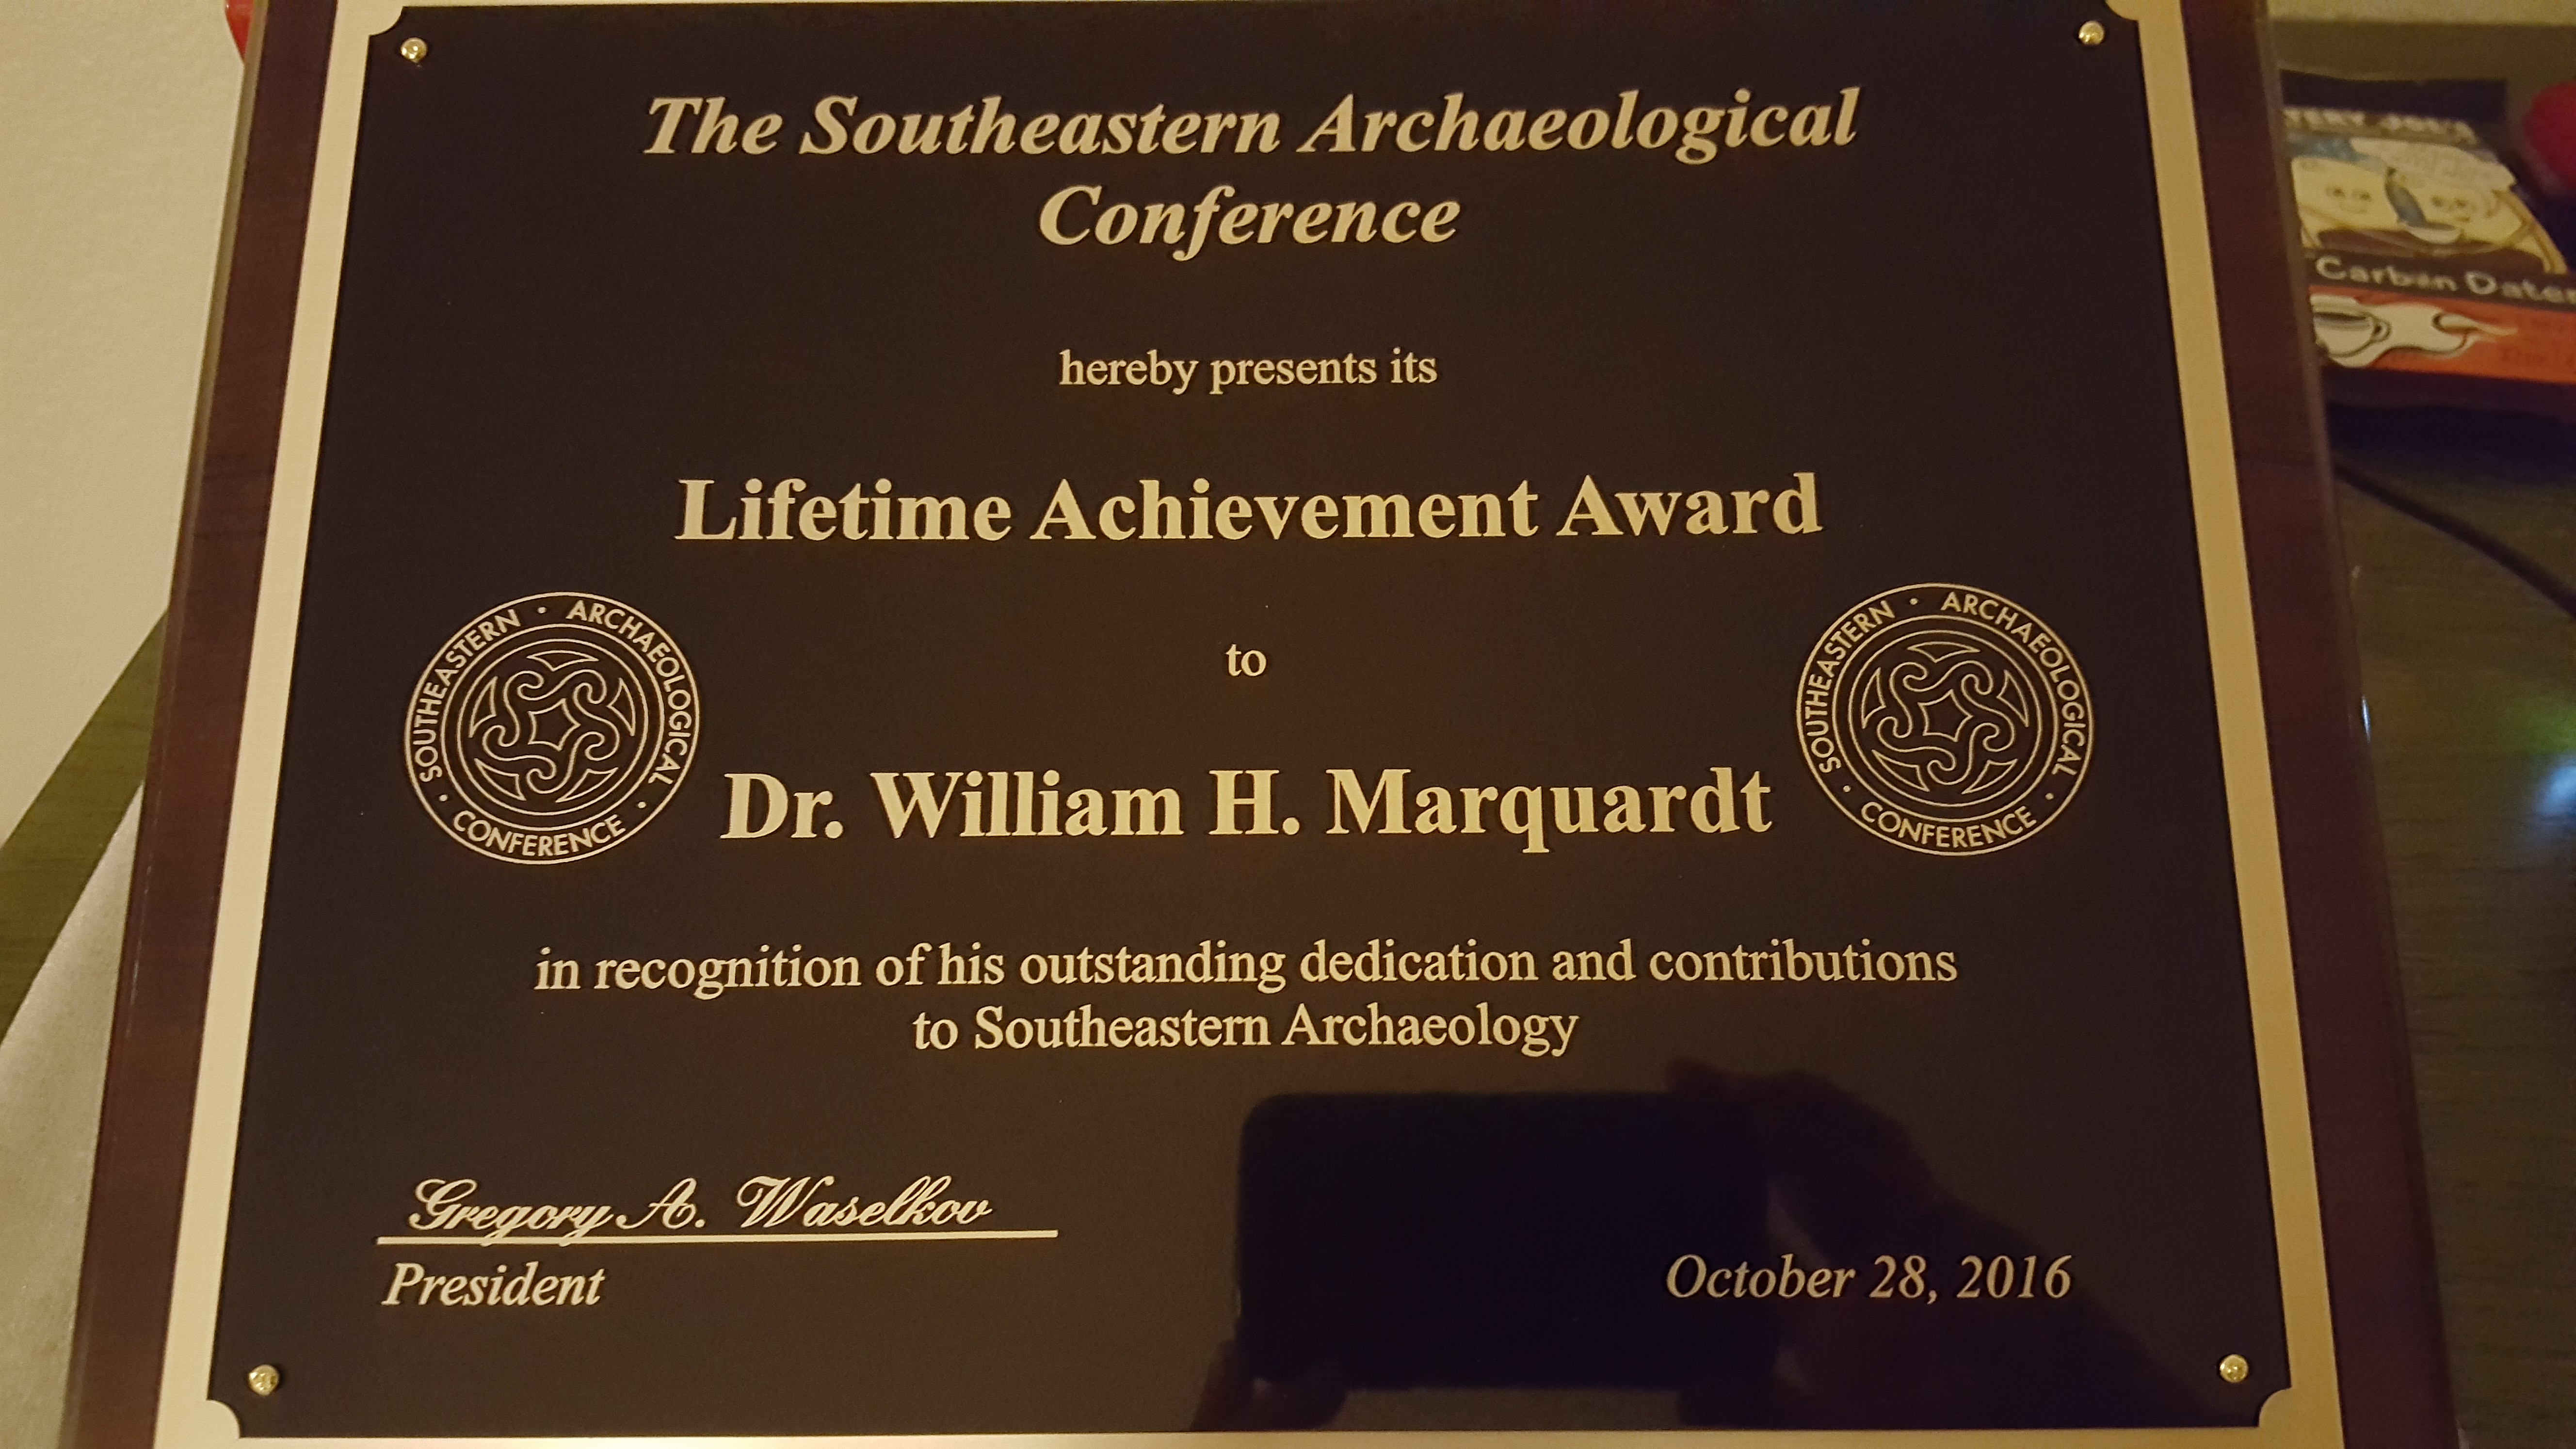 Photo of diploma plaque given to Dr. William H. Marquardt.